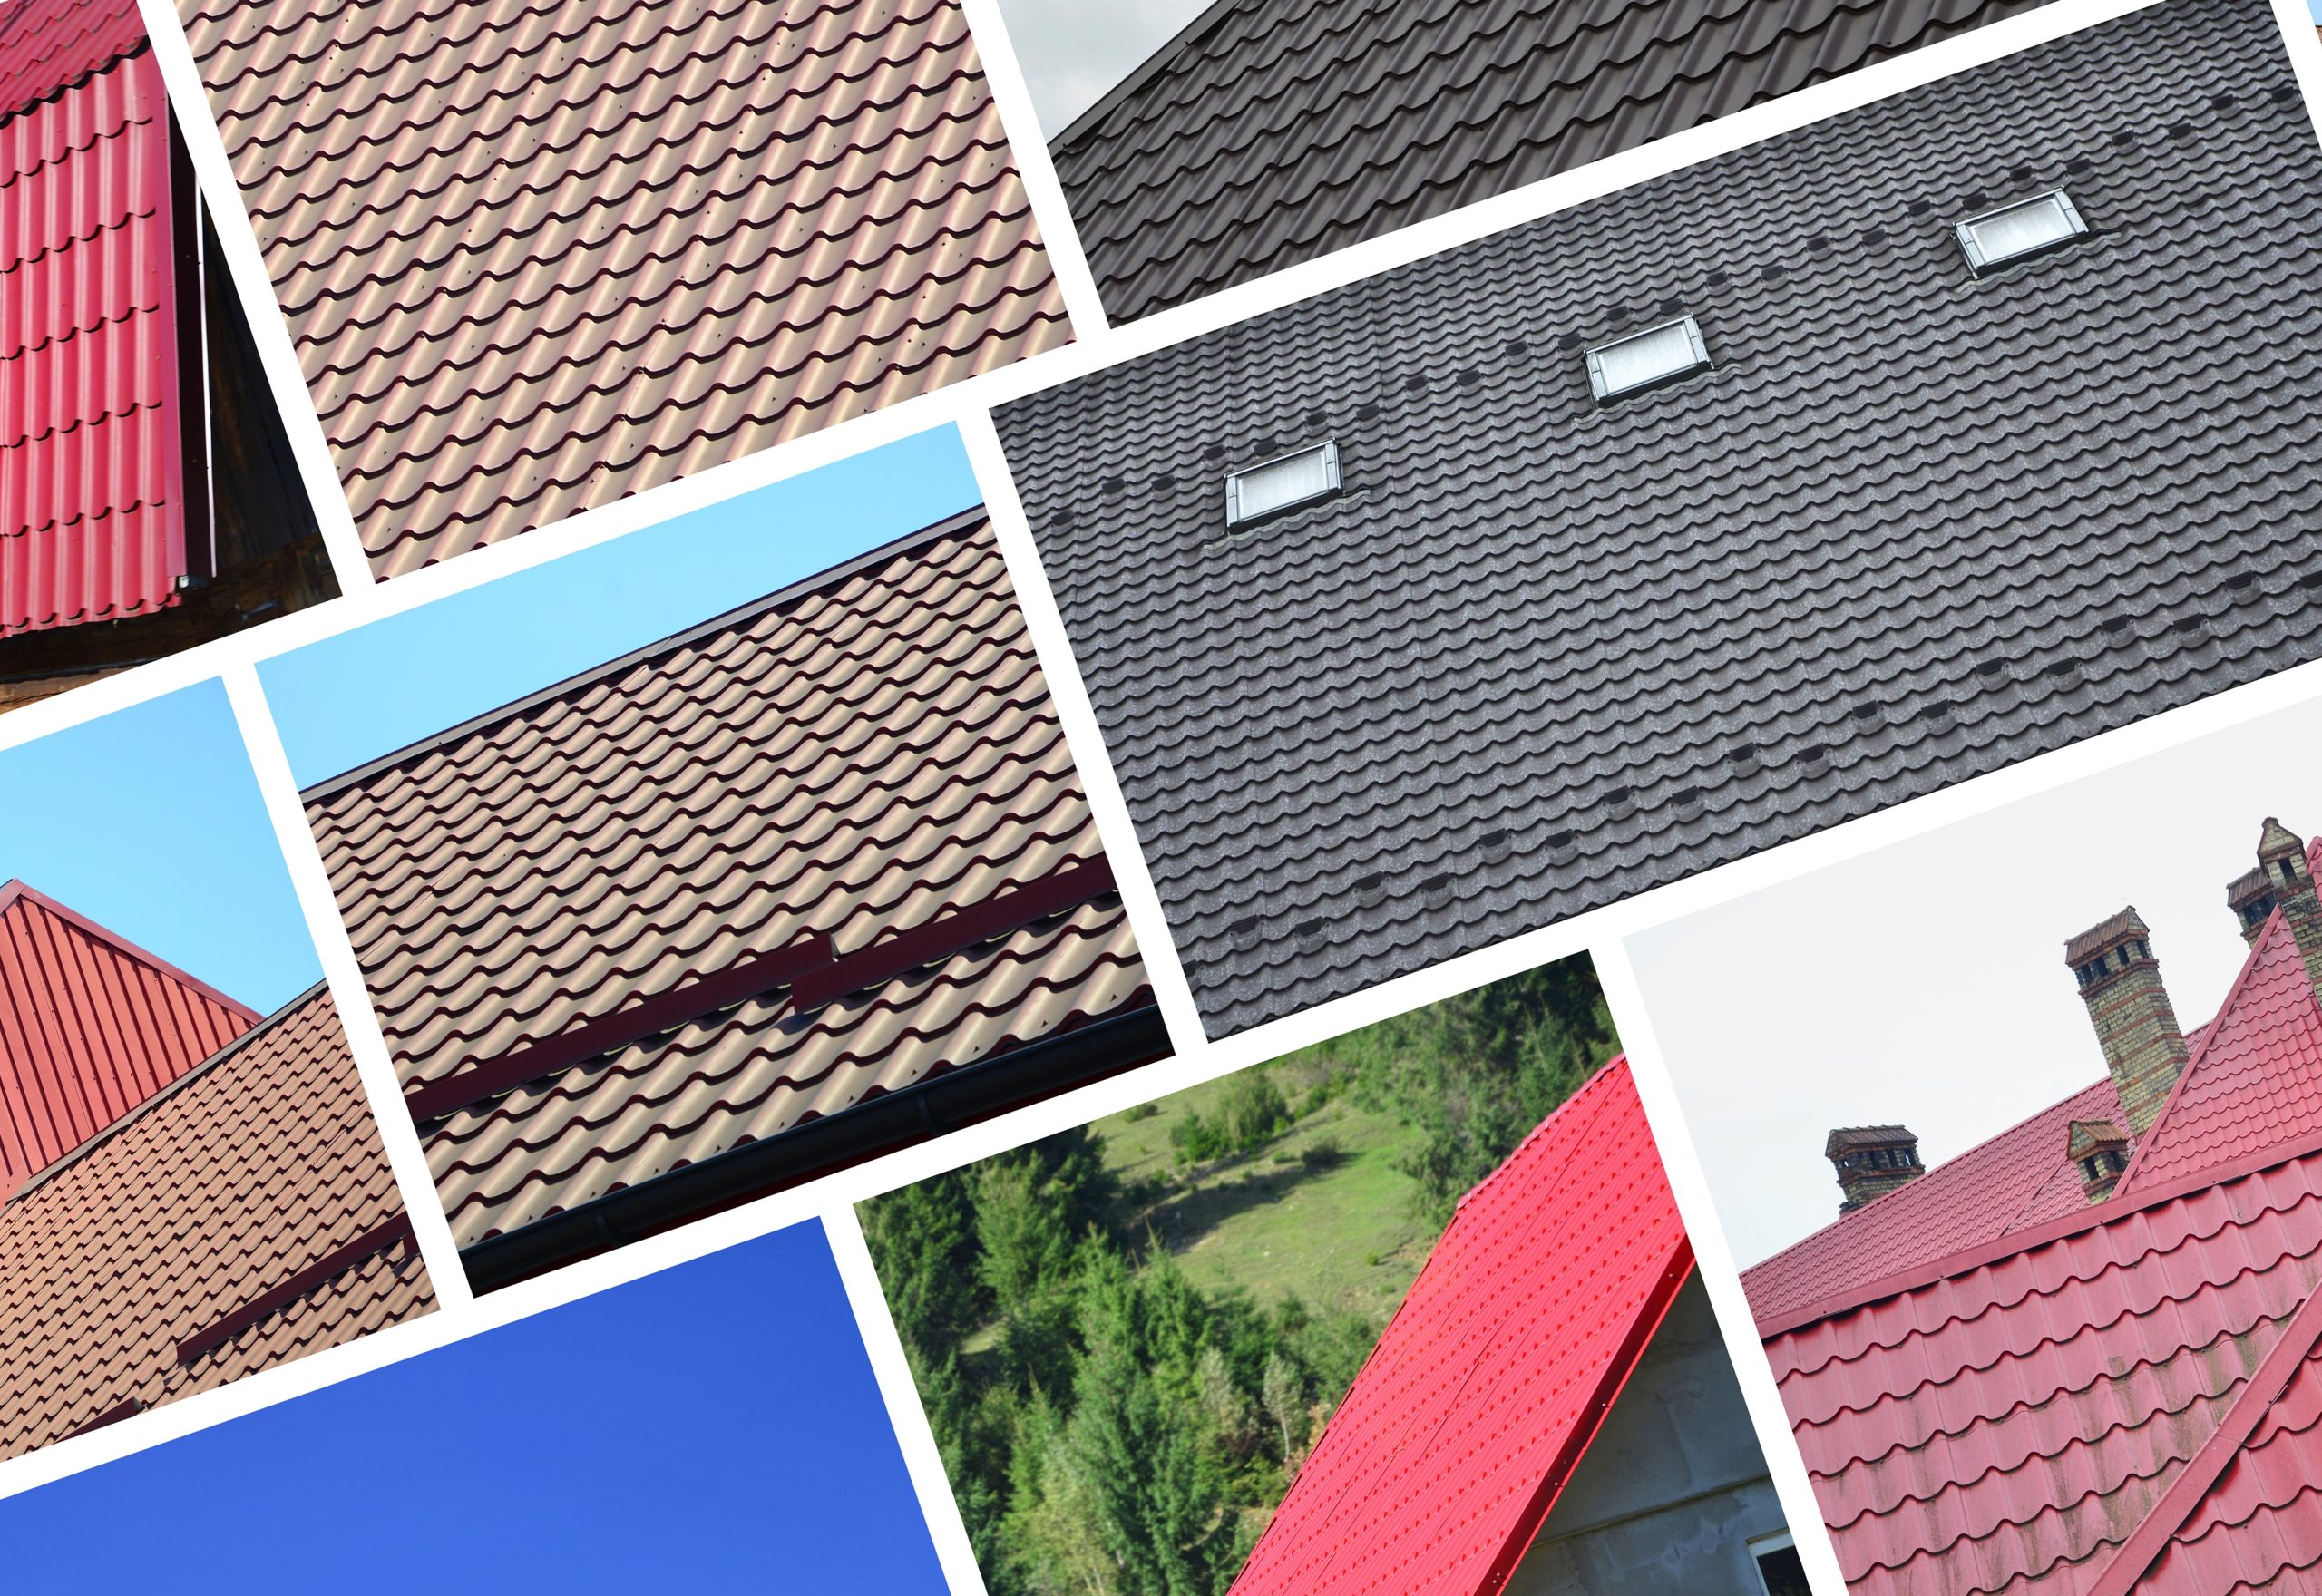 How to Choose the Right Roofing Material in Texas